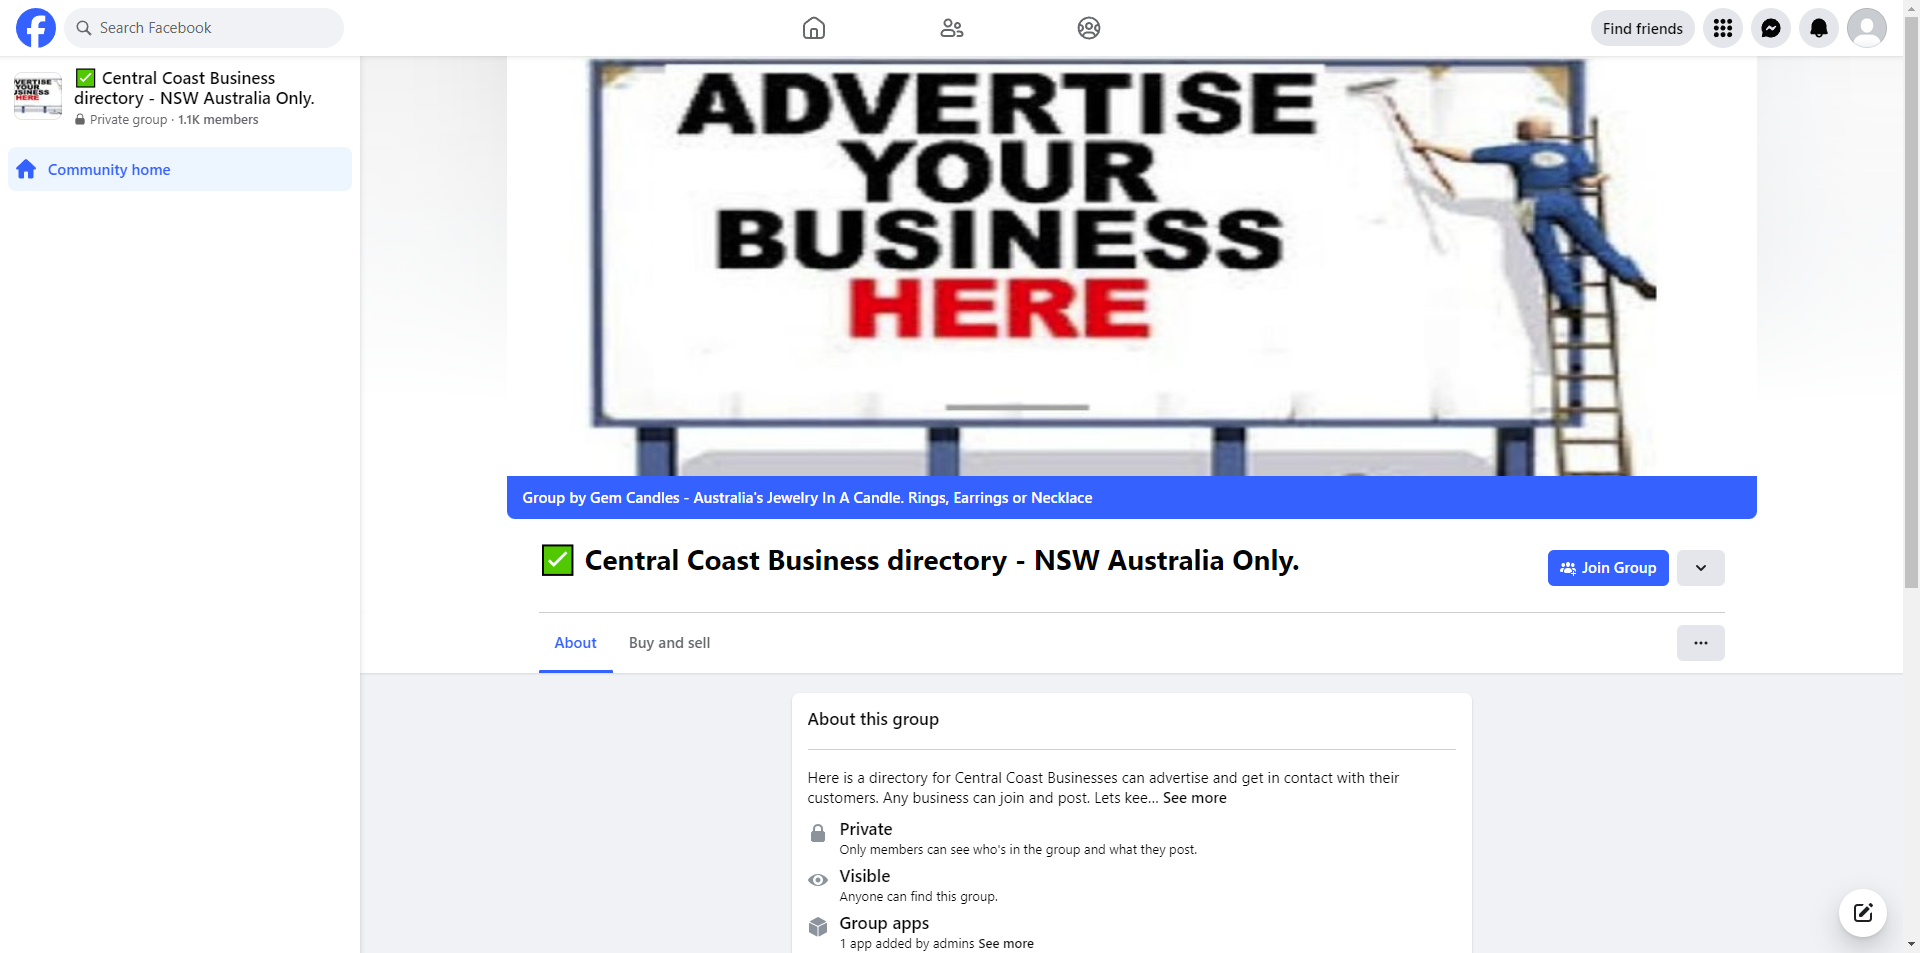 Central Coast Business Directory - NSW Australia Only.